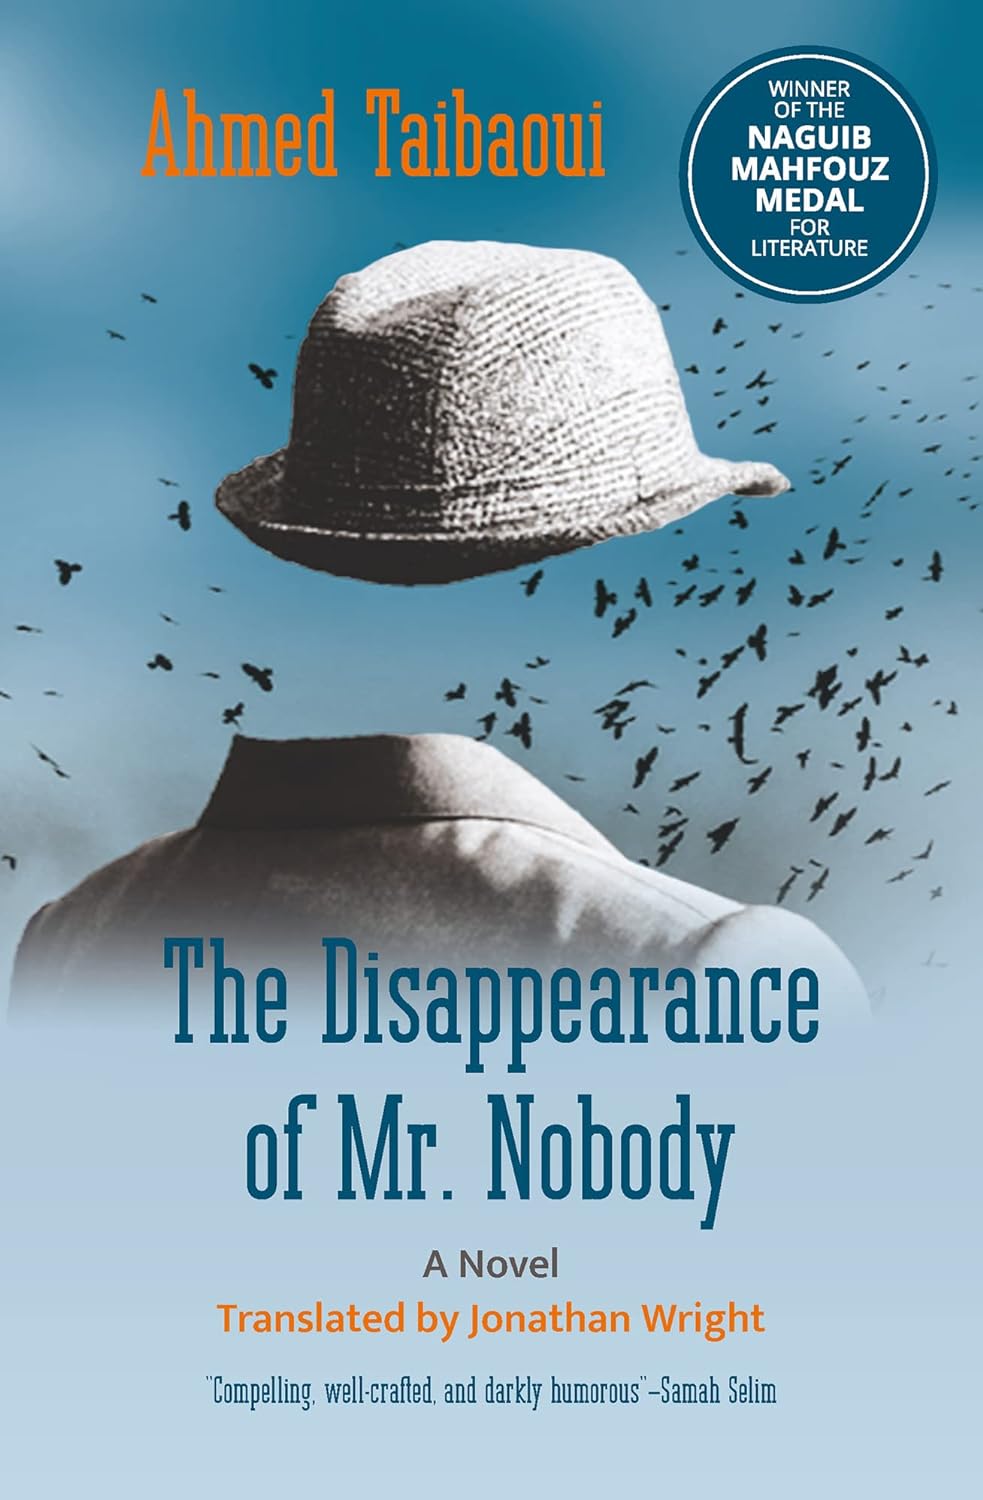 The Disappearance of Mr. Nobody - Ahmed Taibaoui